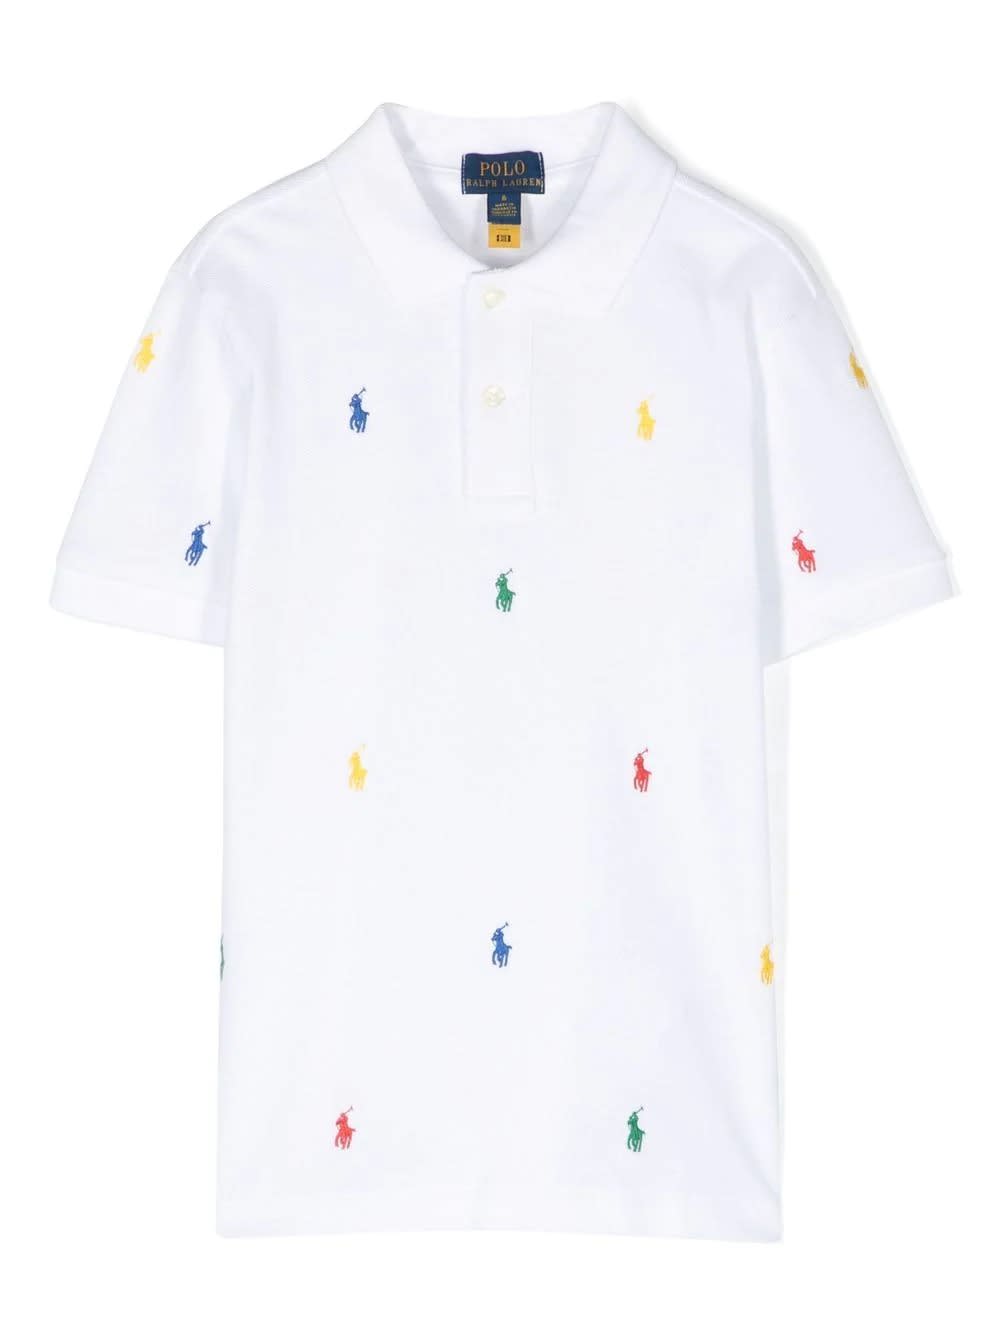 RALPH LAUREN WHITE SHORT SLEEVE POLO SHIRT WITH ALL-OVER PONY